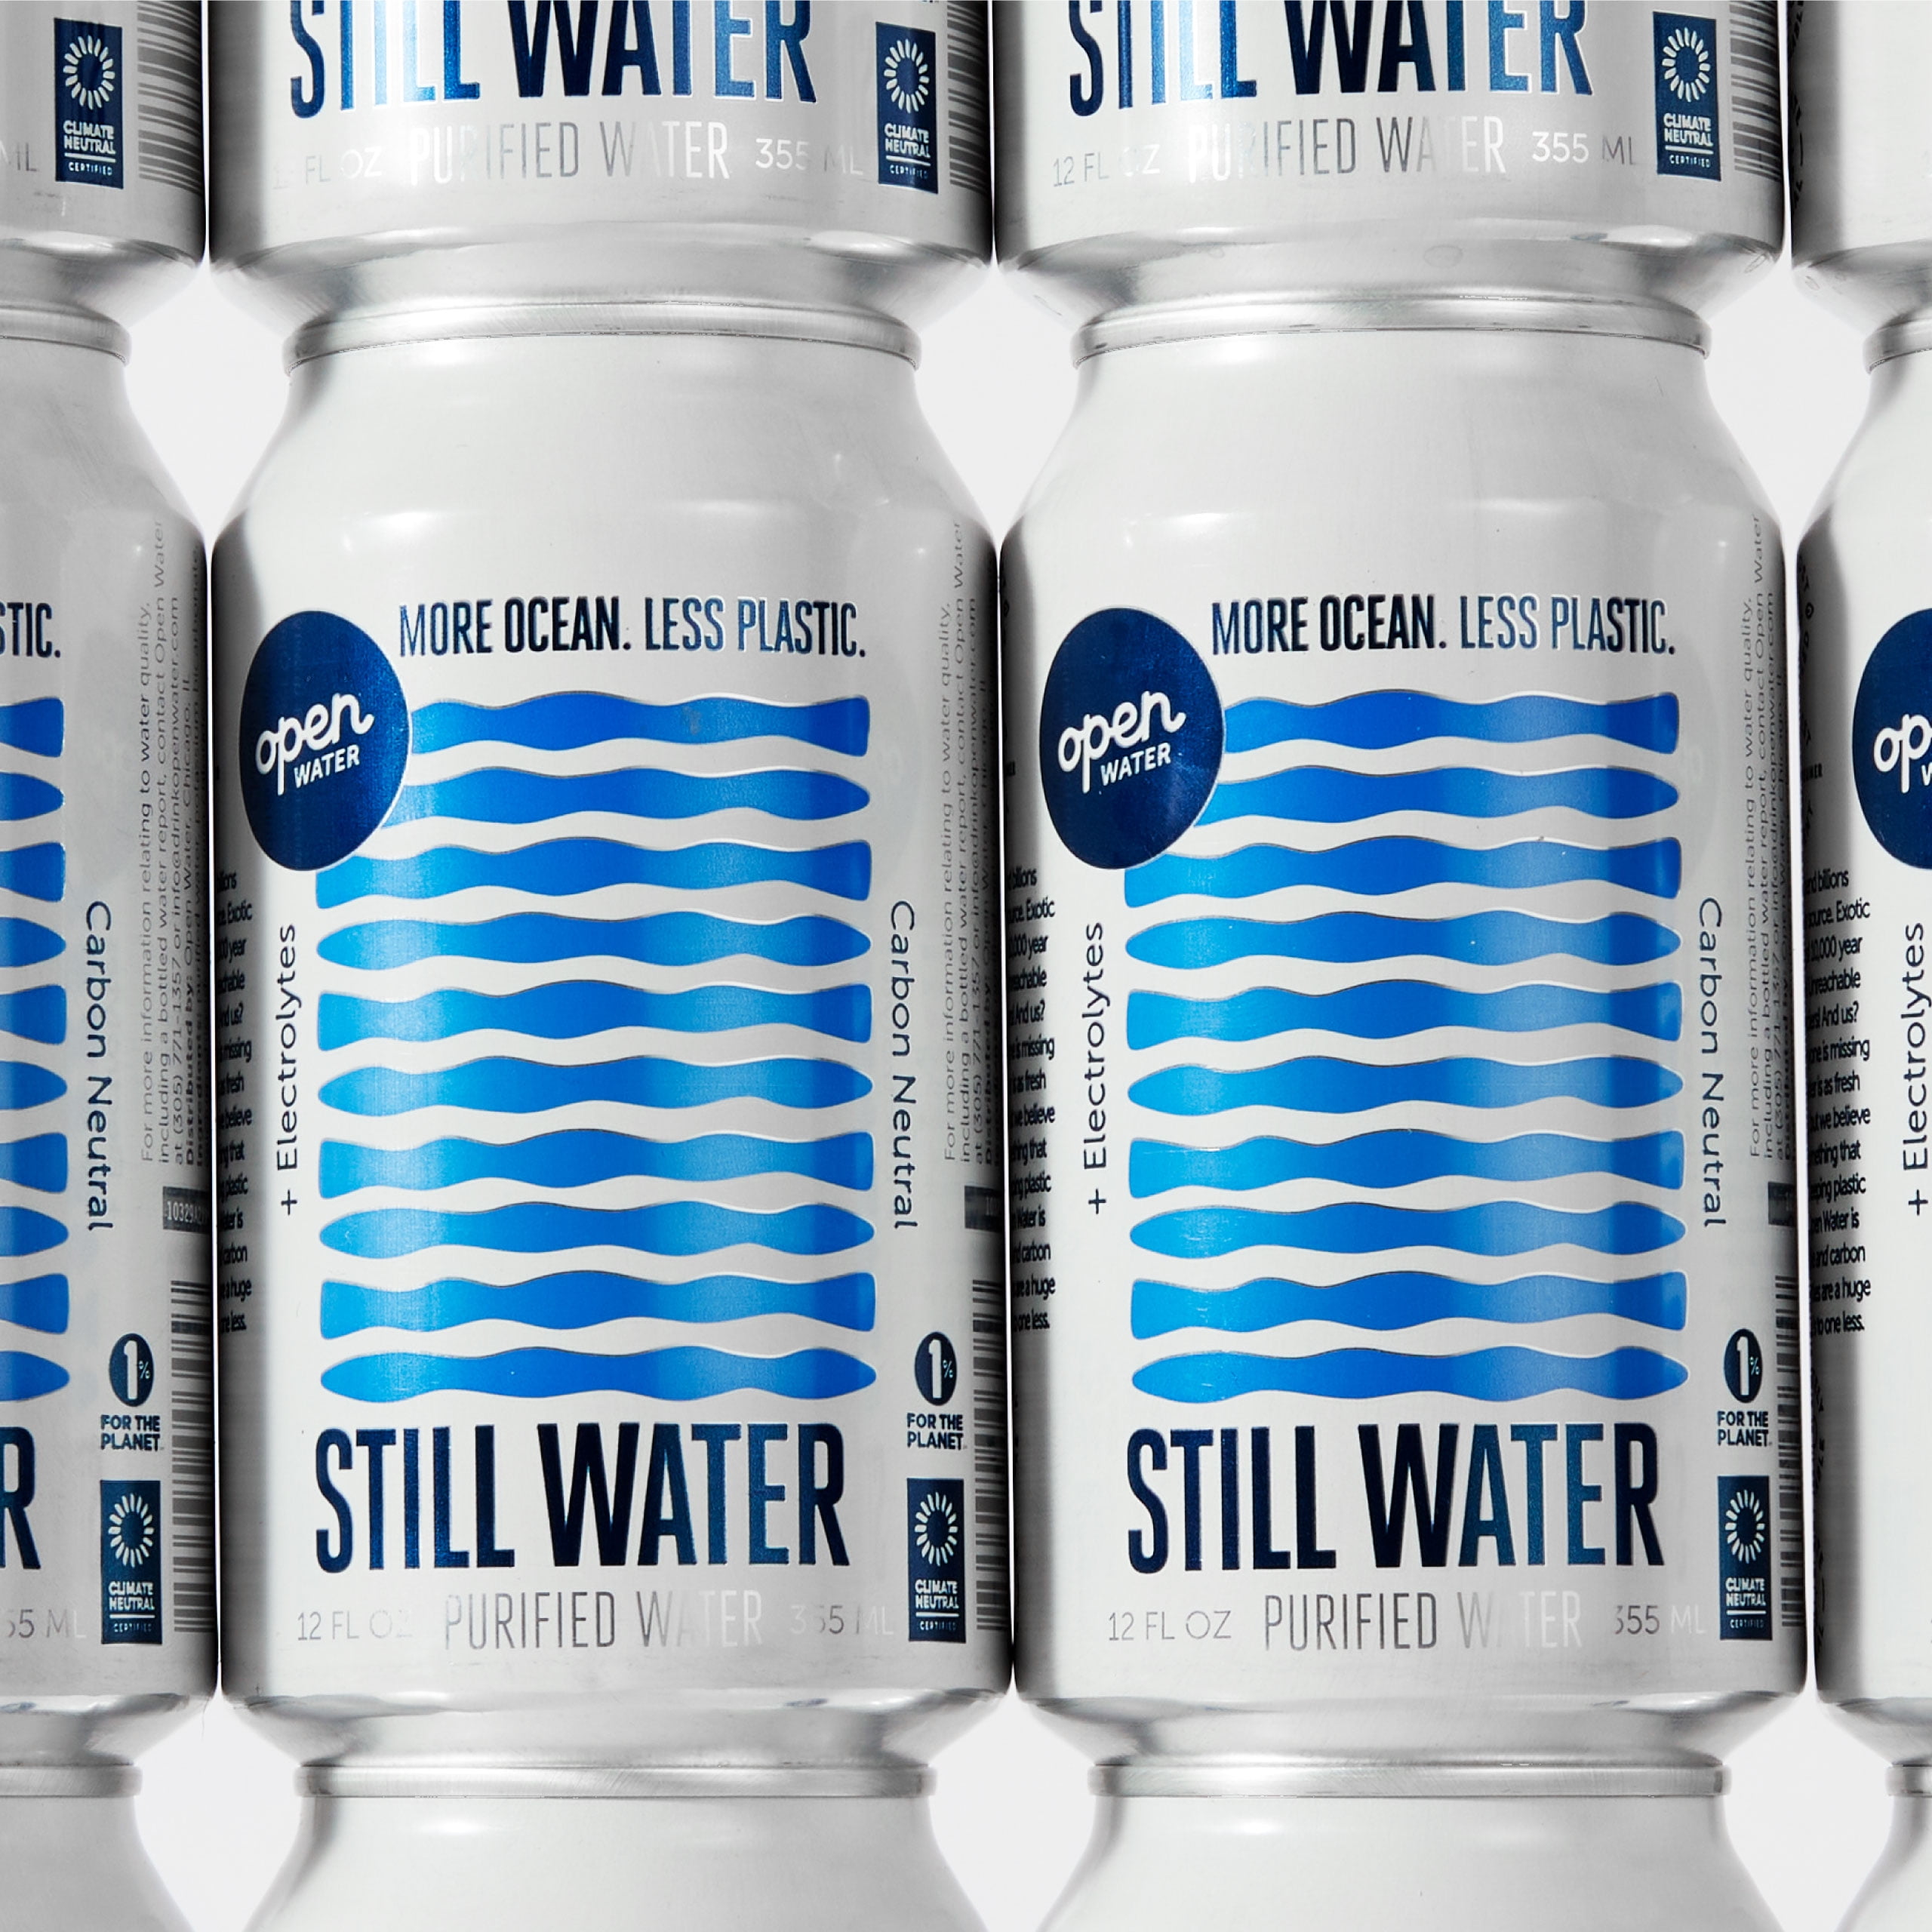  Open Water - Still Cans (2 Cases - Canned Still Water) :  Grocery & Gourmet Food